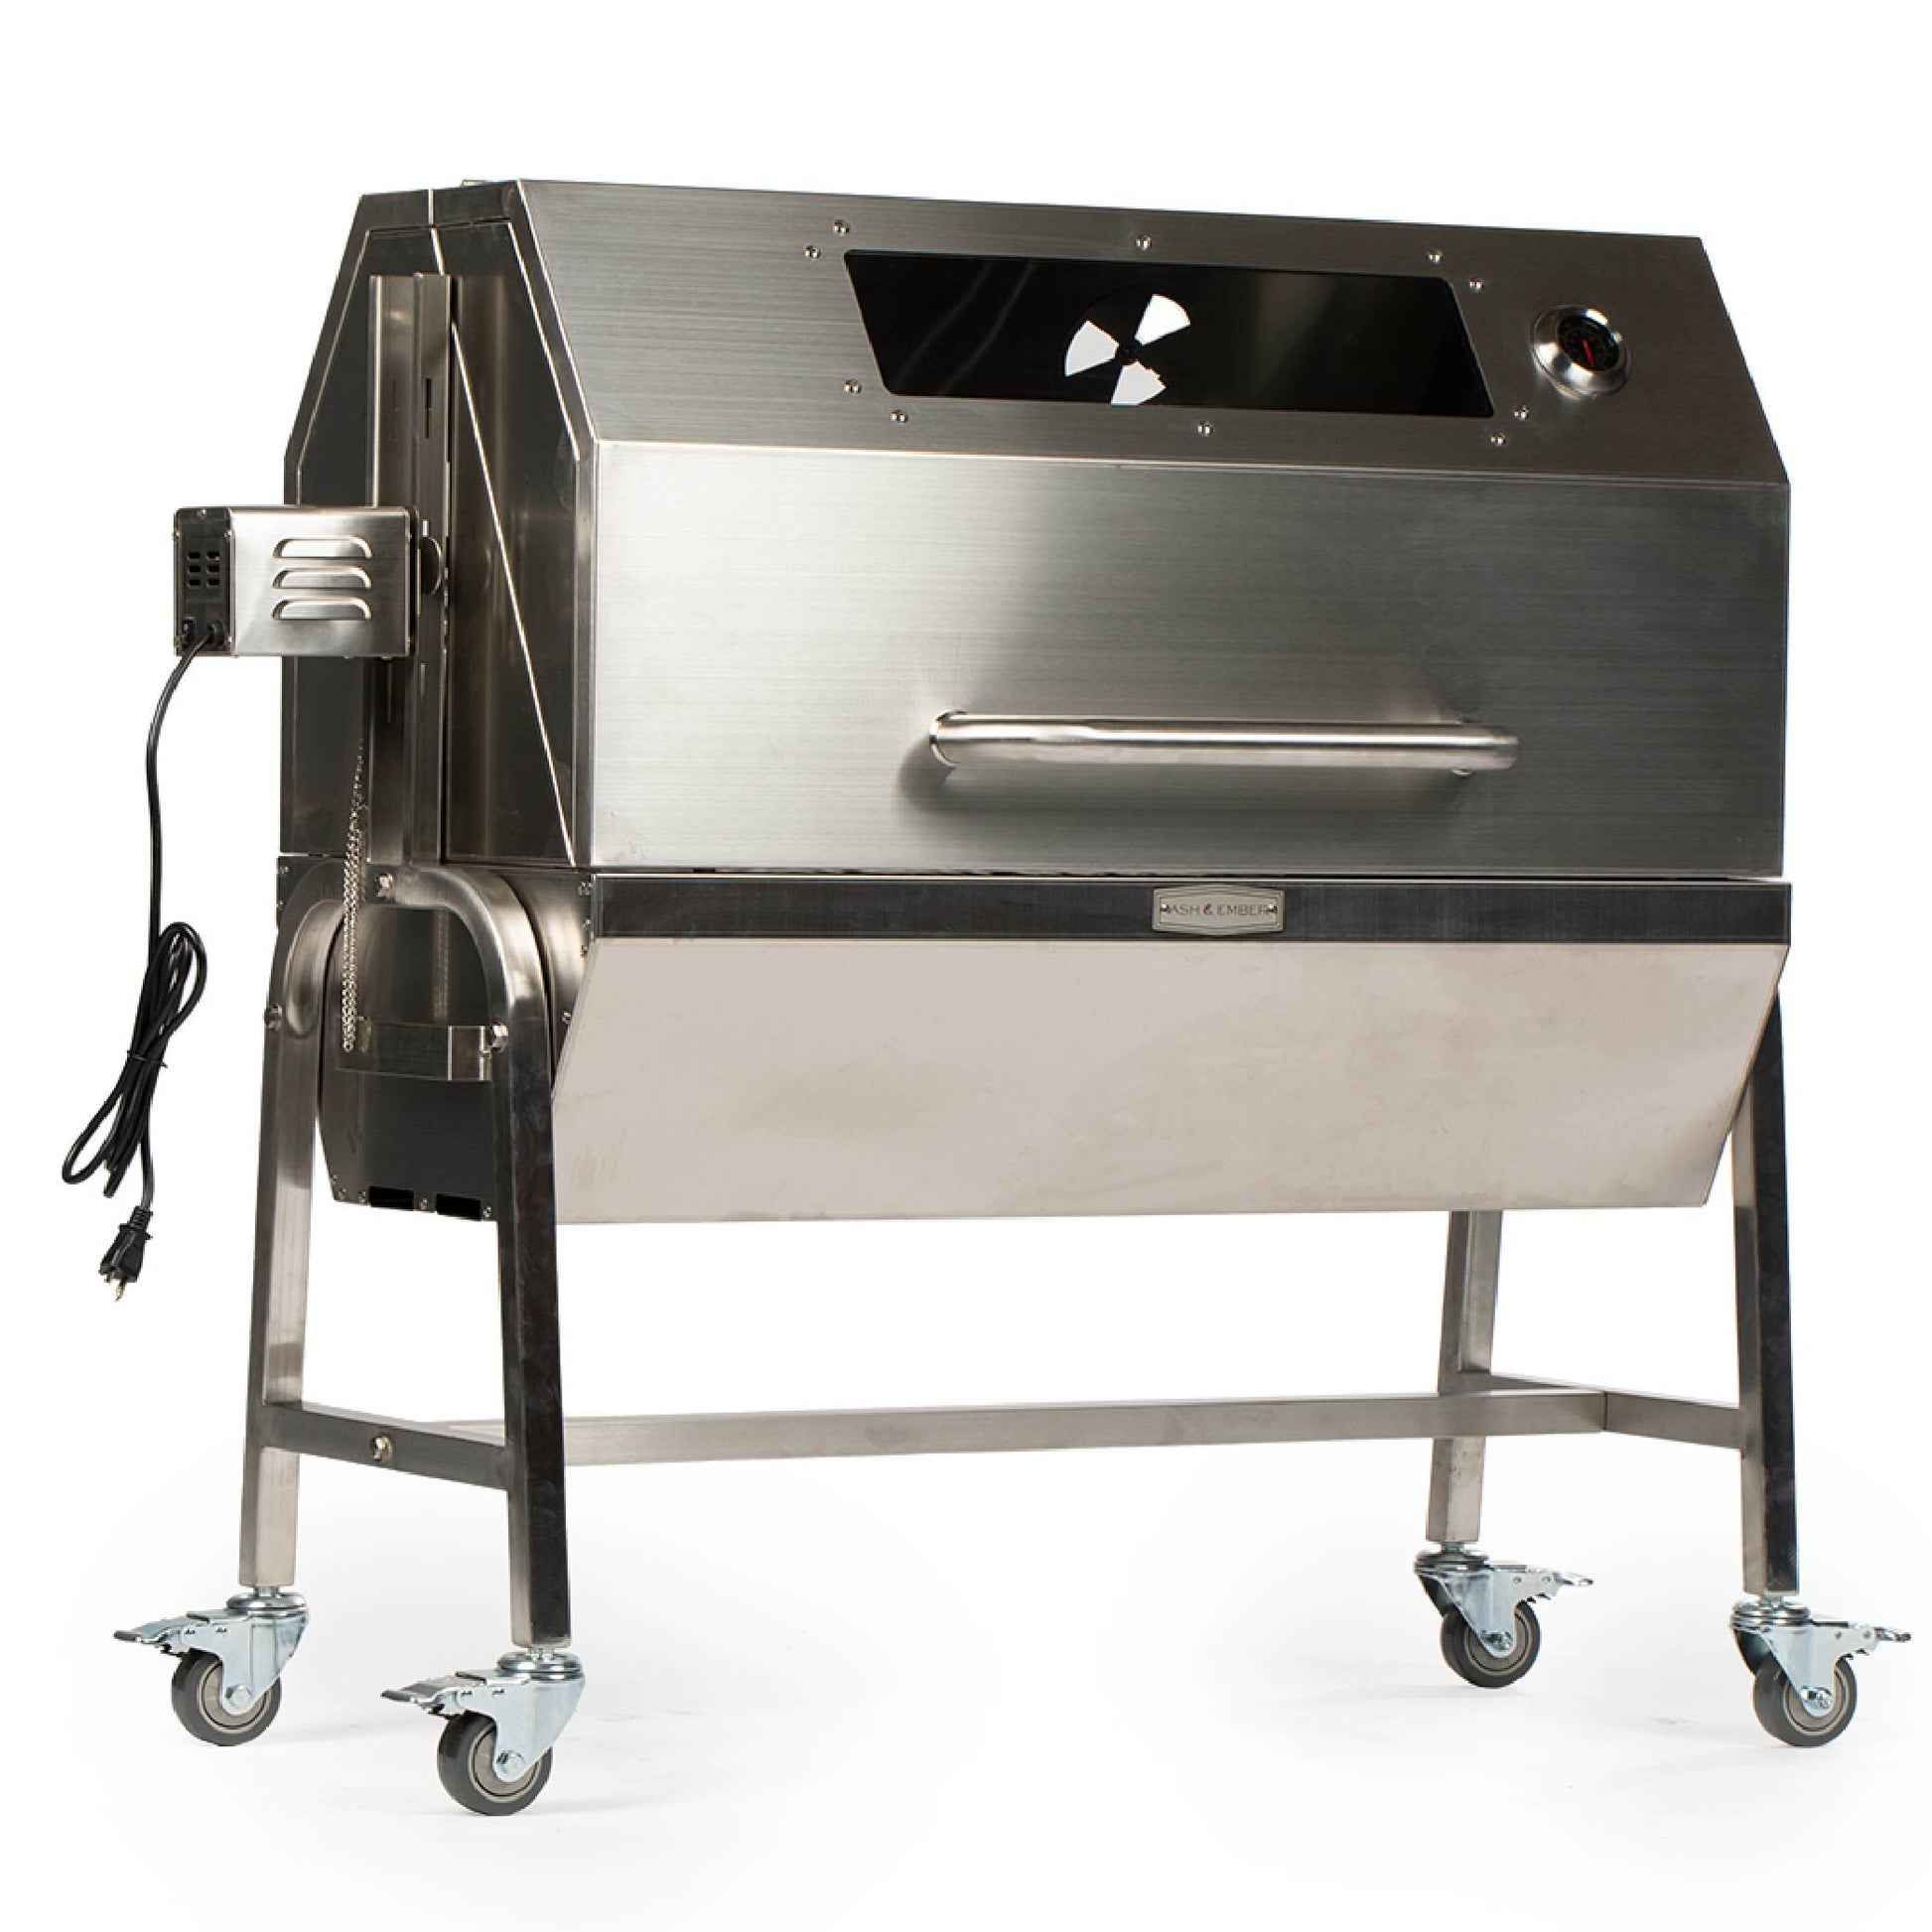 SCRATCH AND DENT - 13W Rotisserie Grill with Hood - FINAL SALE